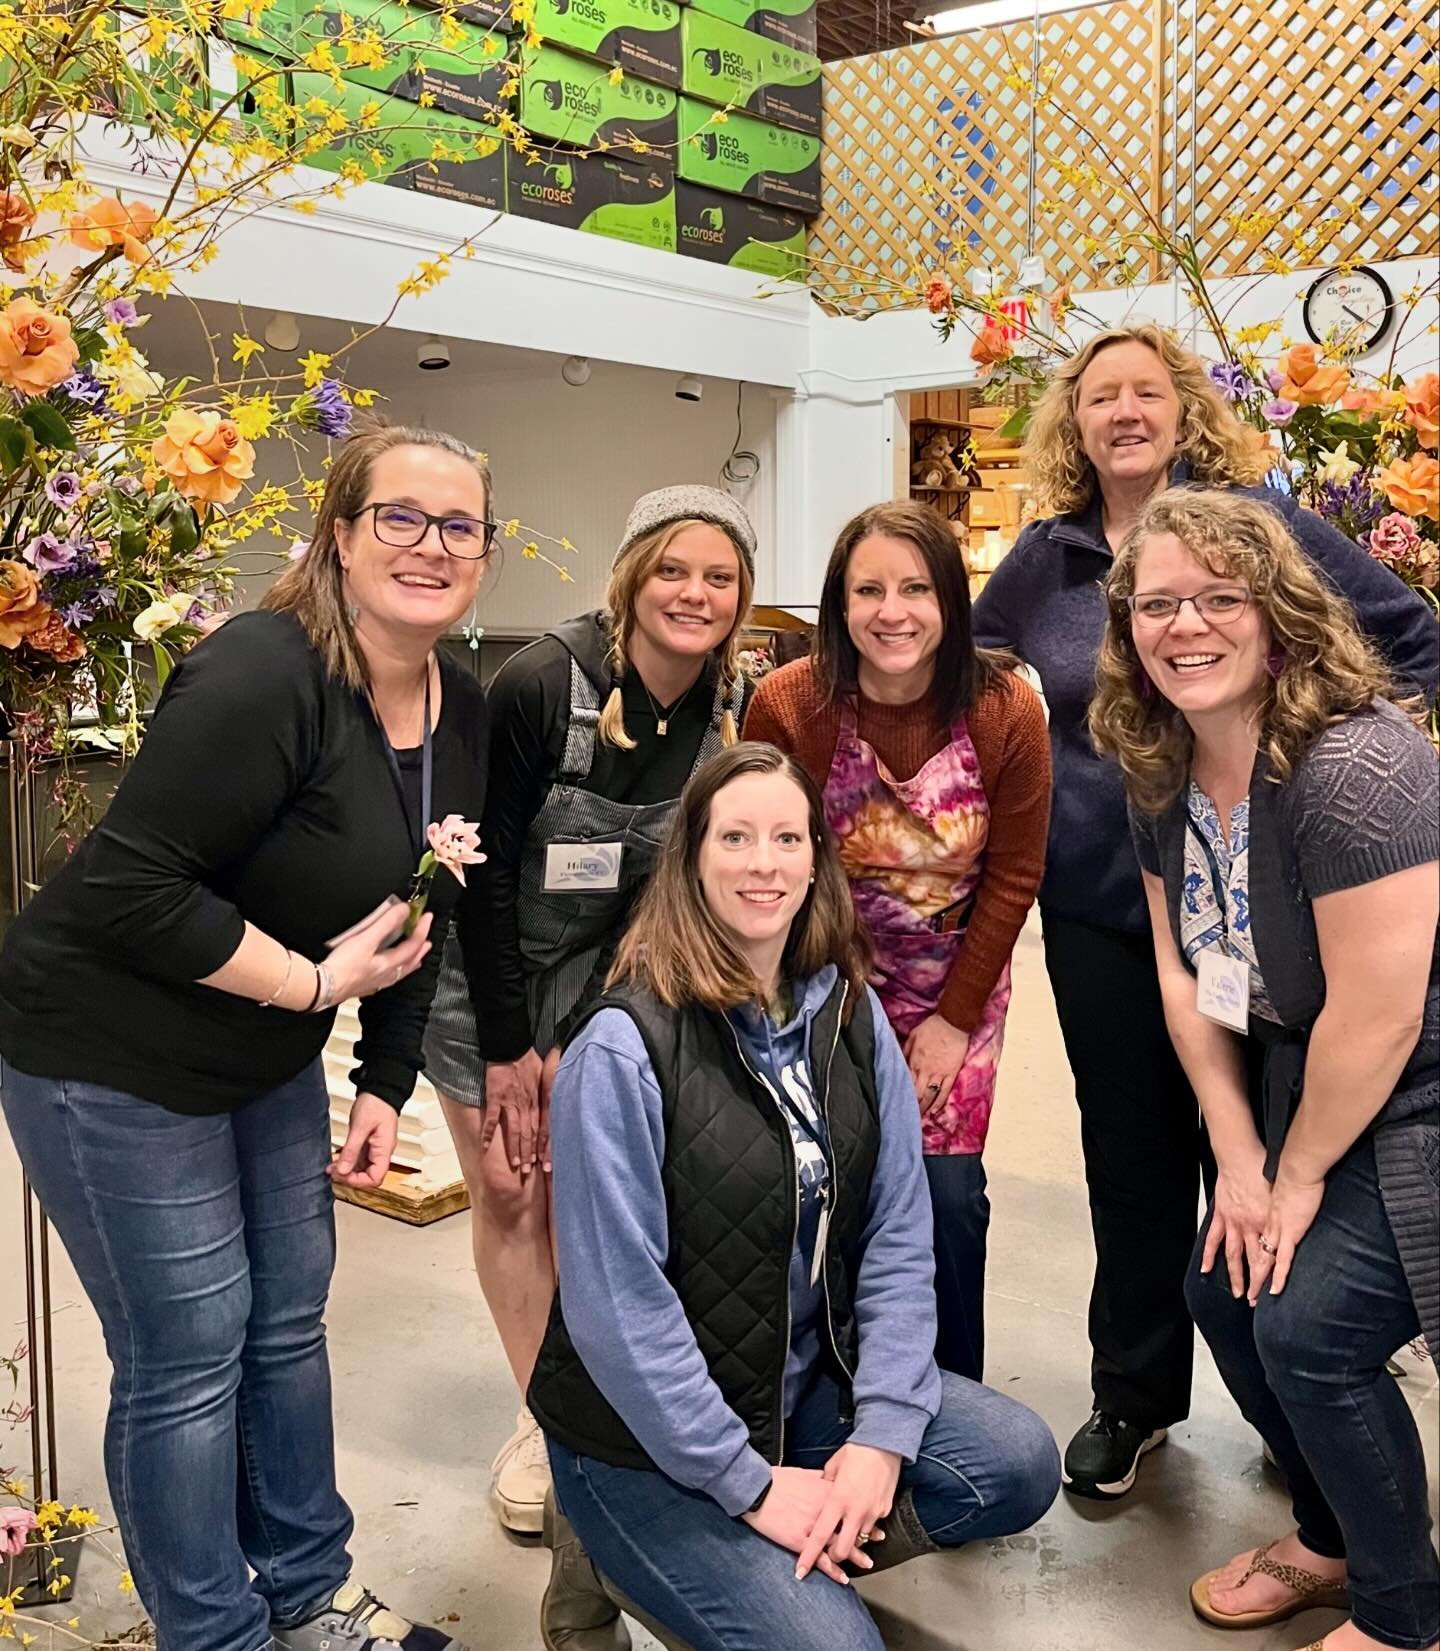 Good fun was had by all as our team made two standing arrangements, intended to flank a doorway leading into a reception. Thank you to @greenmountainfloralsupply for hosting the design workshop last month (great product!) and to @passionflowersue for